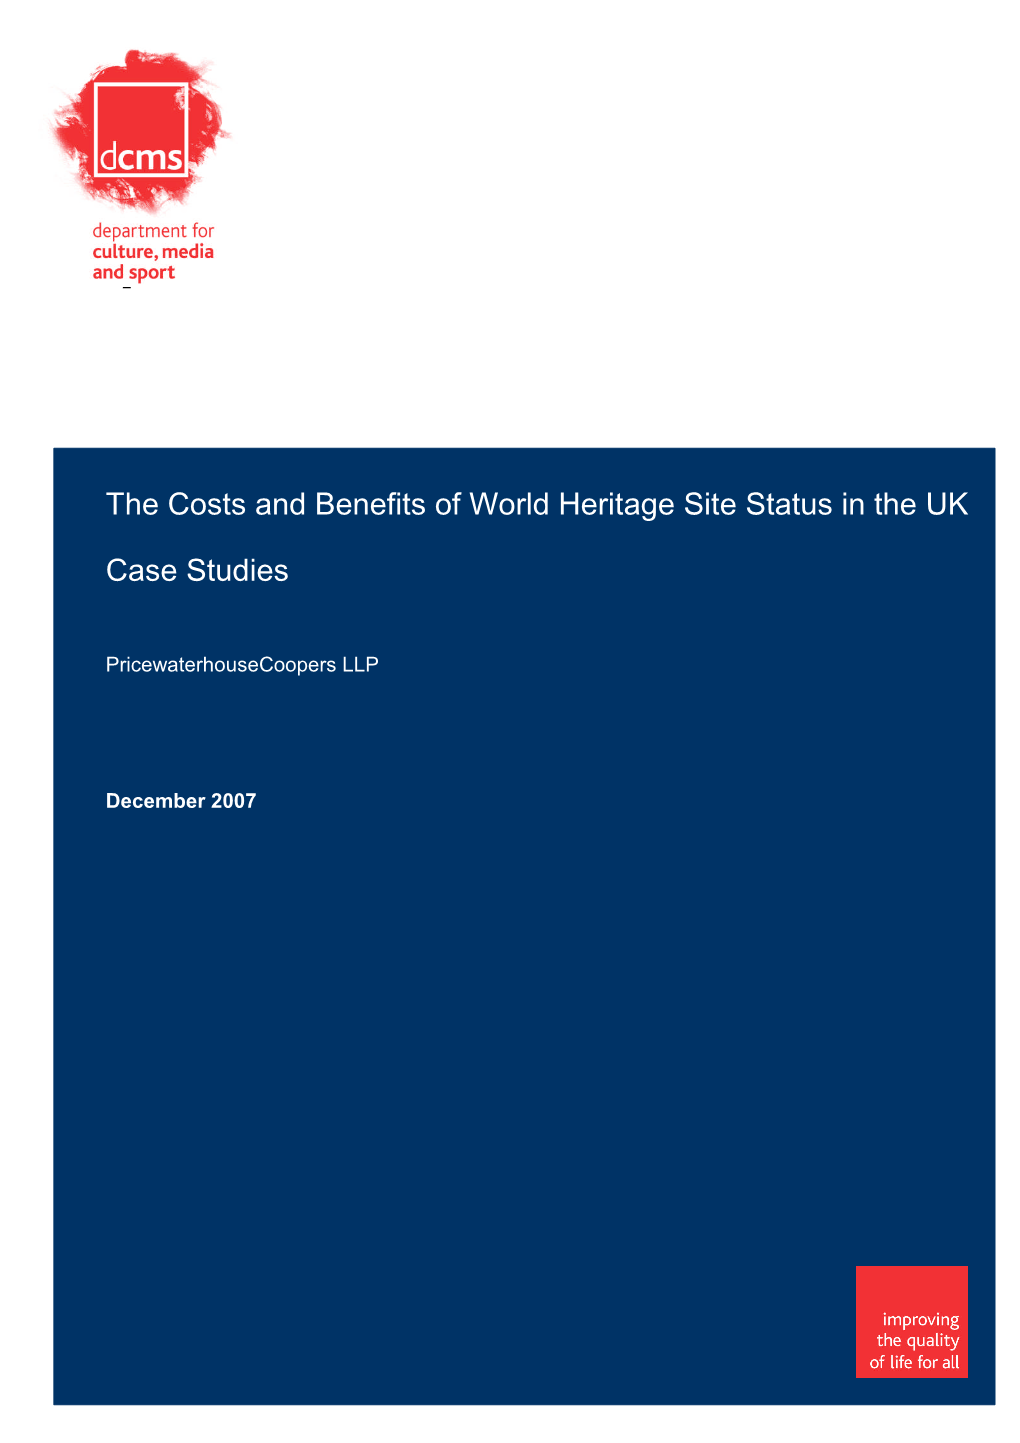 The Costs and Benefits of World Heritage Site Status in the UK